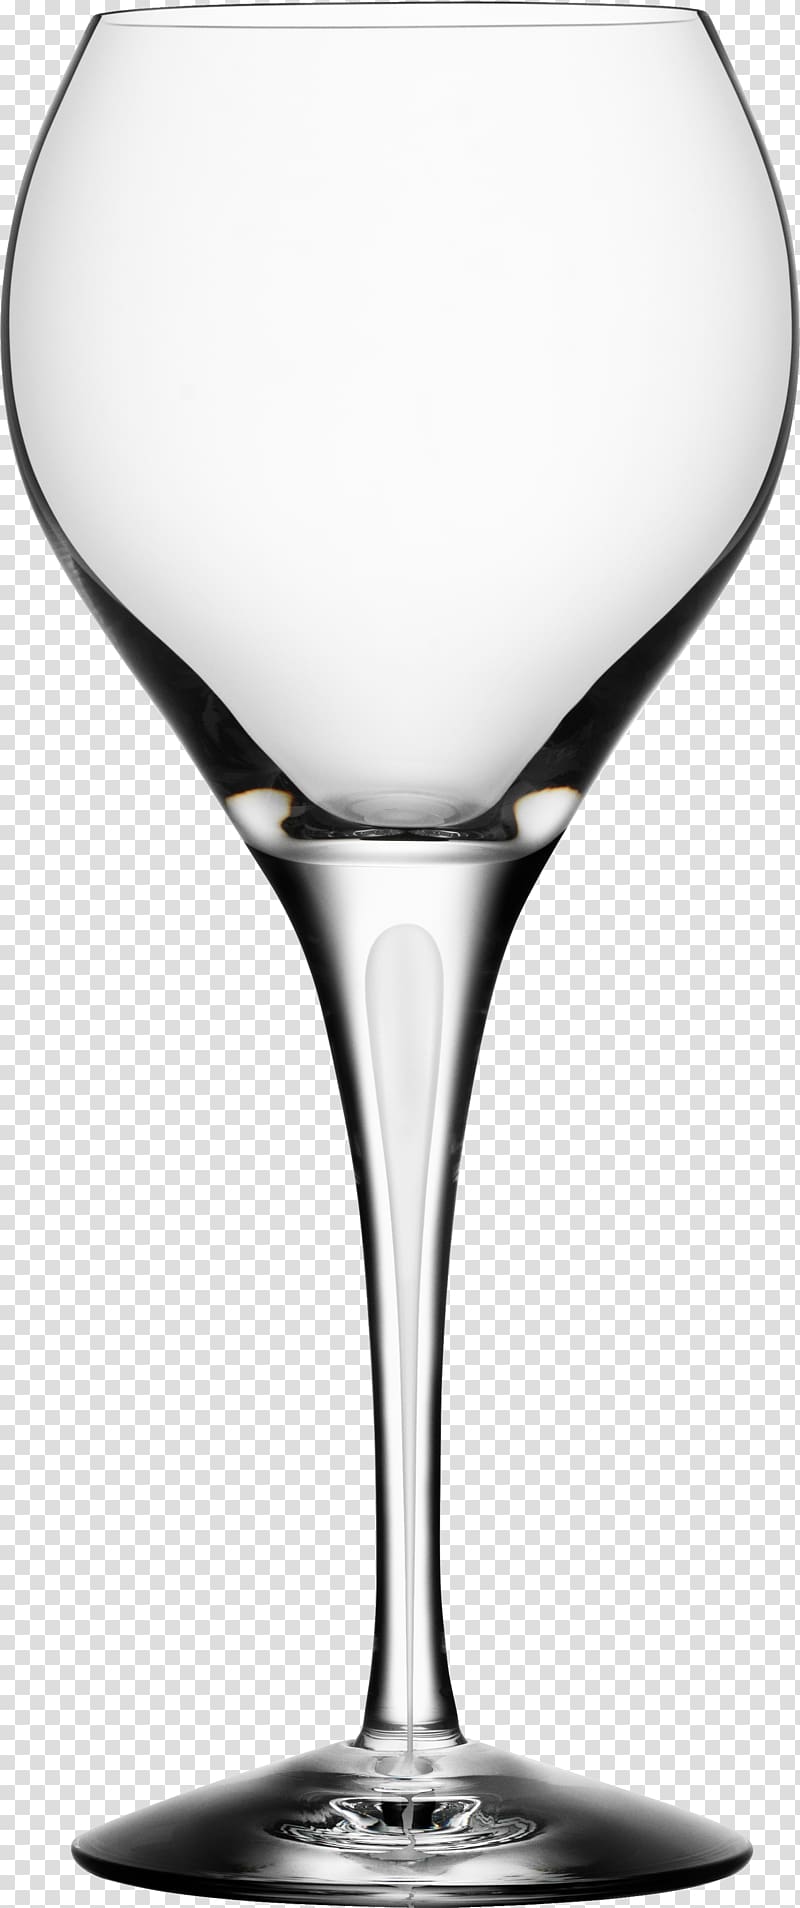 wine glass , Wine glass Cocktail Champagne glass, Empty wine glass transparent background PNG clipart